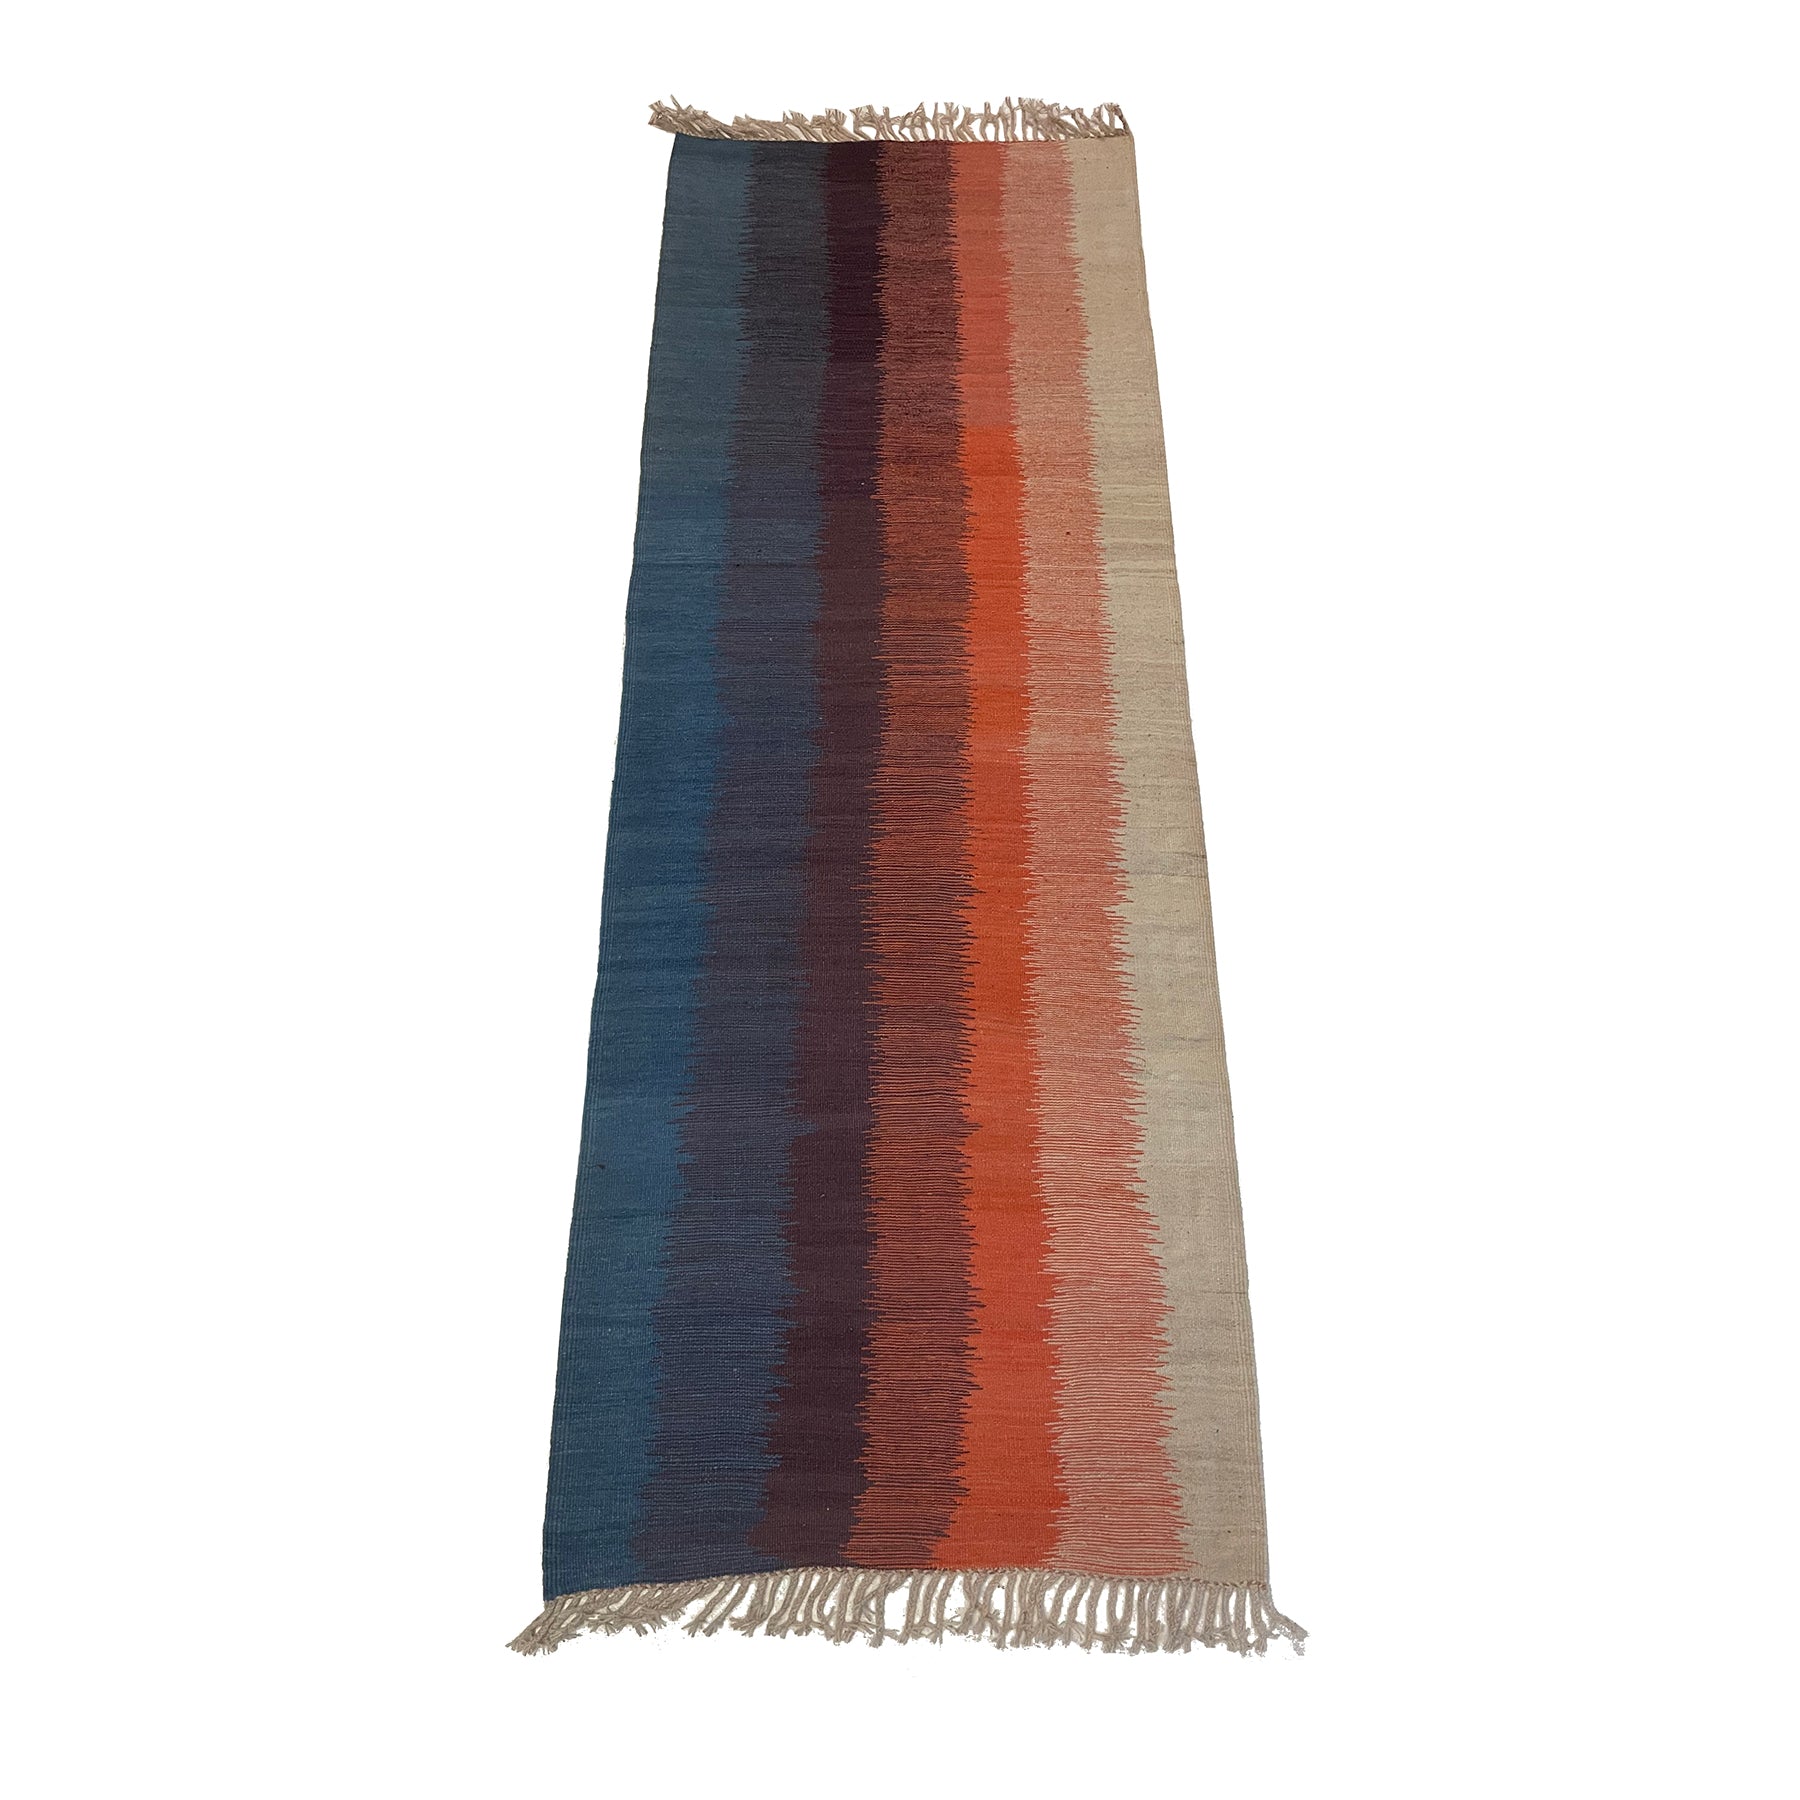 Blue purple orange and cream vertical bands of color on this flatweave Moroccan kilim